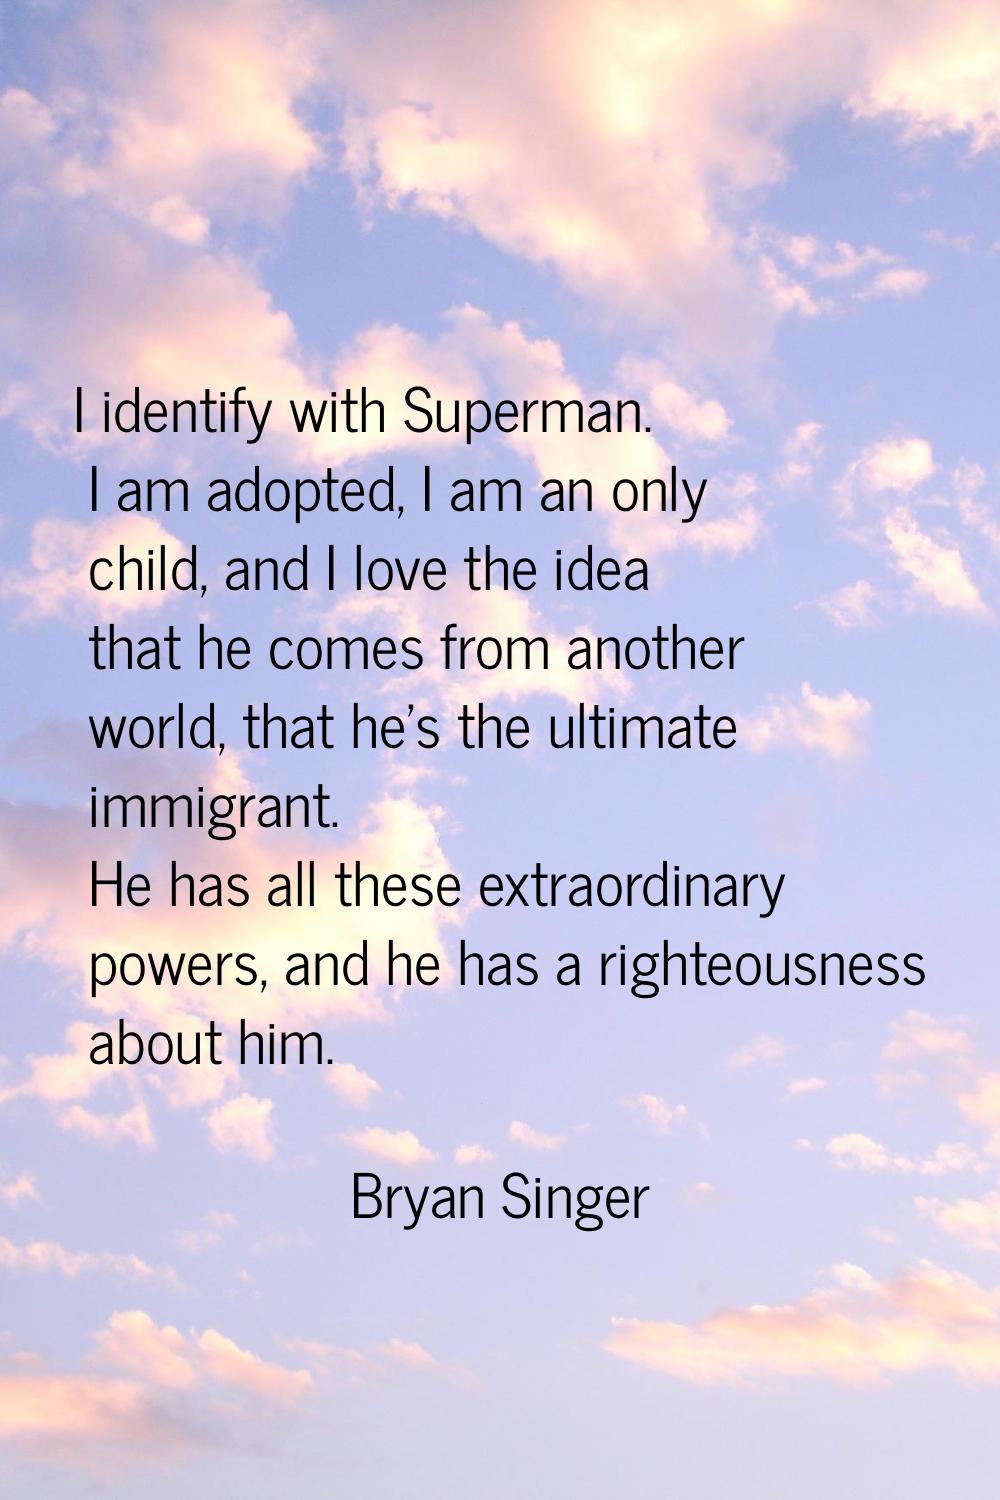 I identify with Superman. I am adopted, I am an only child, and I love the idea that he comes from 